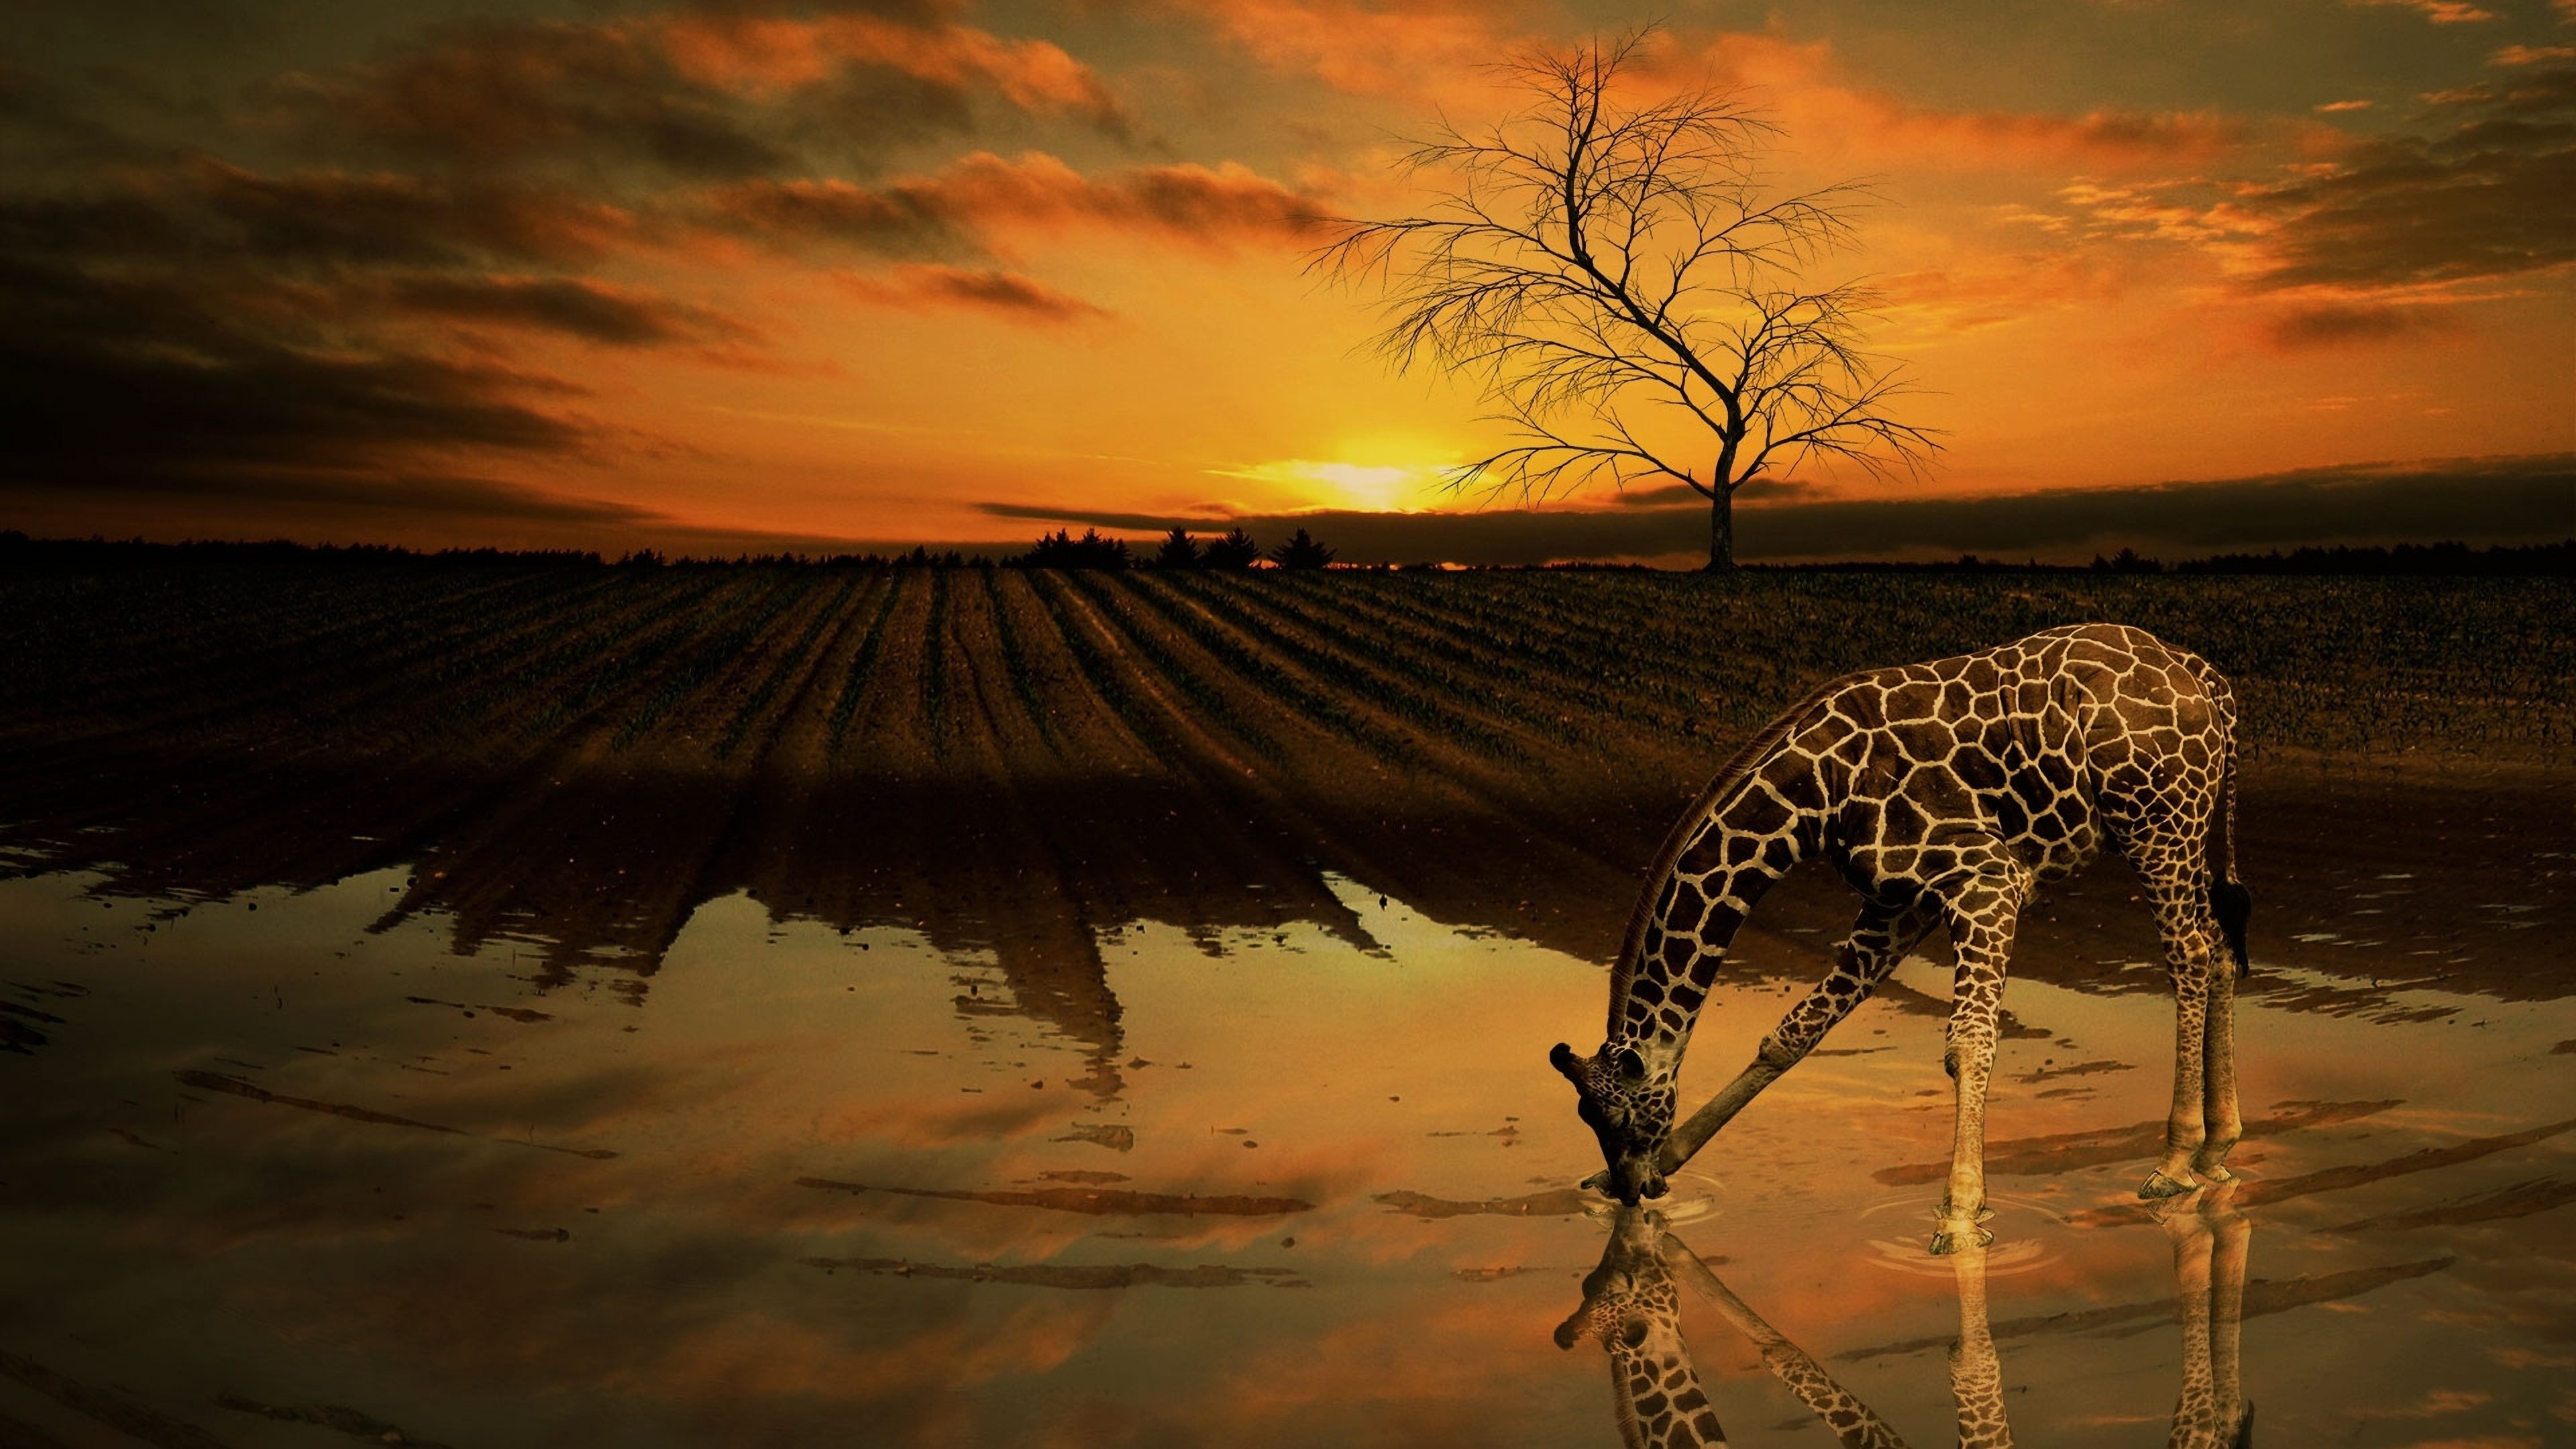 Giraffe: Classified by the International Union for Conservation of Nature as vulnerable to extinction and has been extirpated from many parts of its former range. 3840x2160 4K Background.